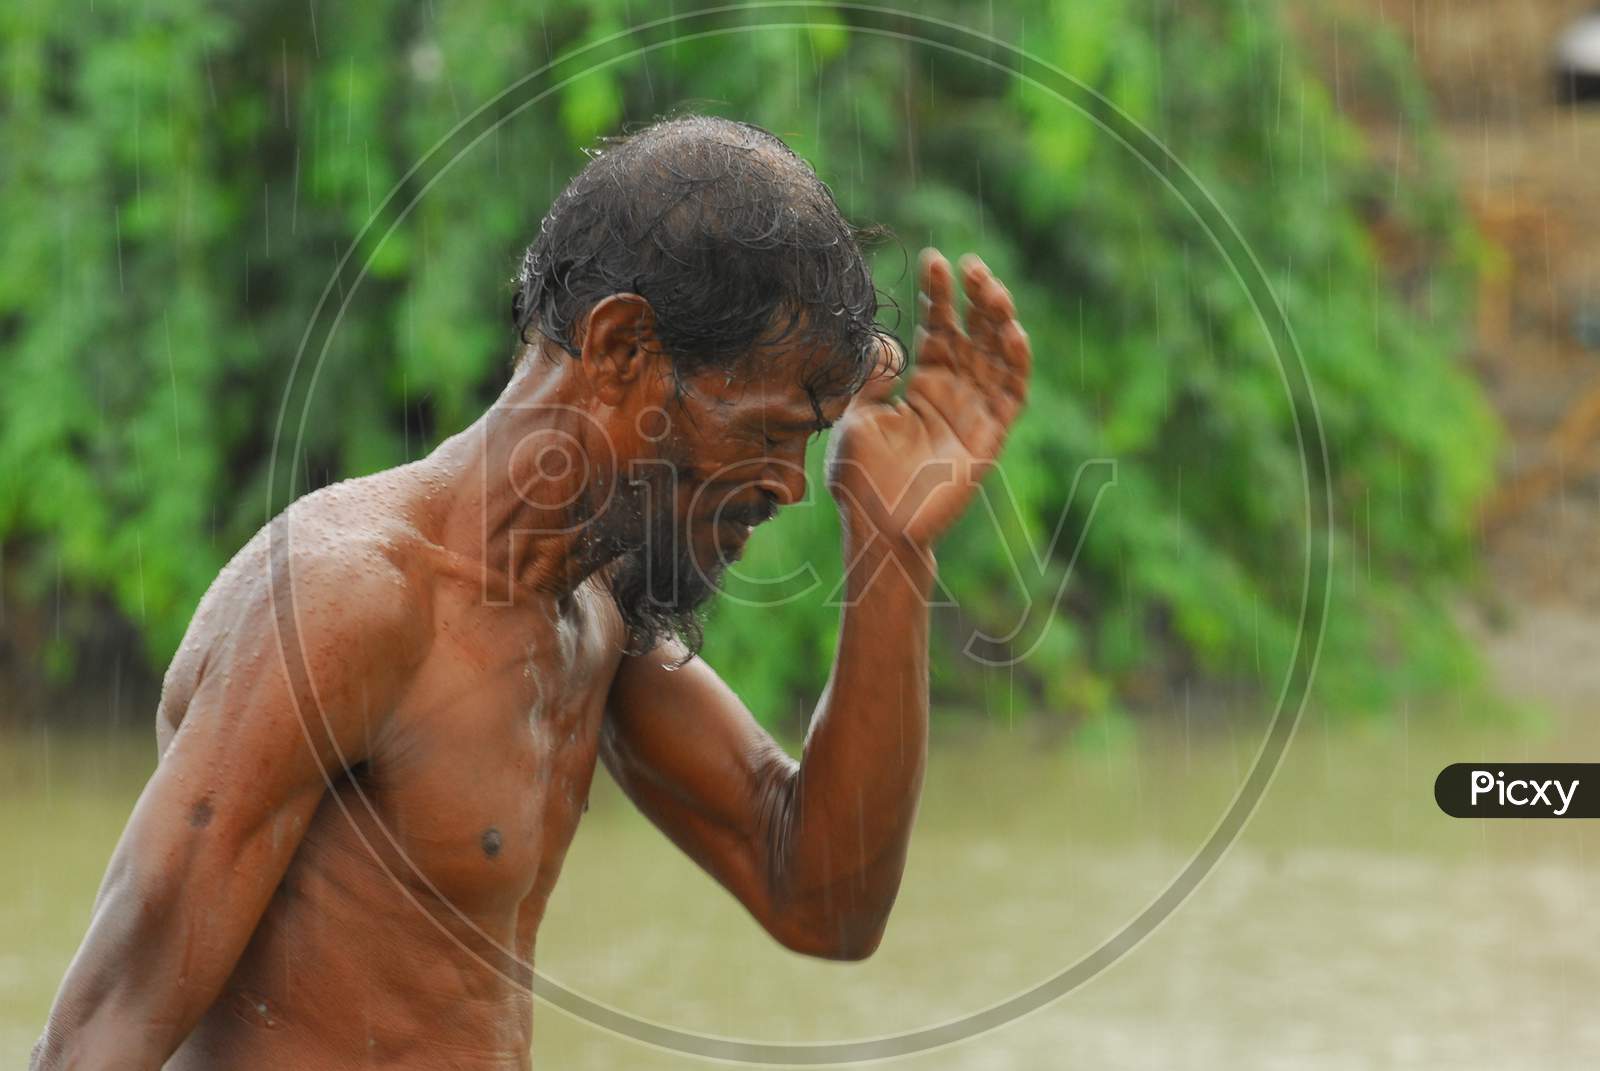 Indian bare chested man wiping water from his face